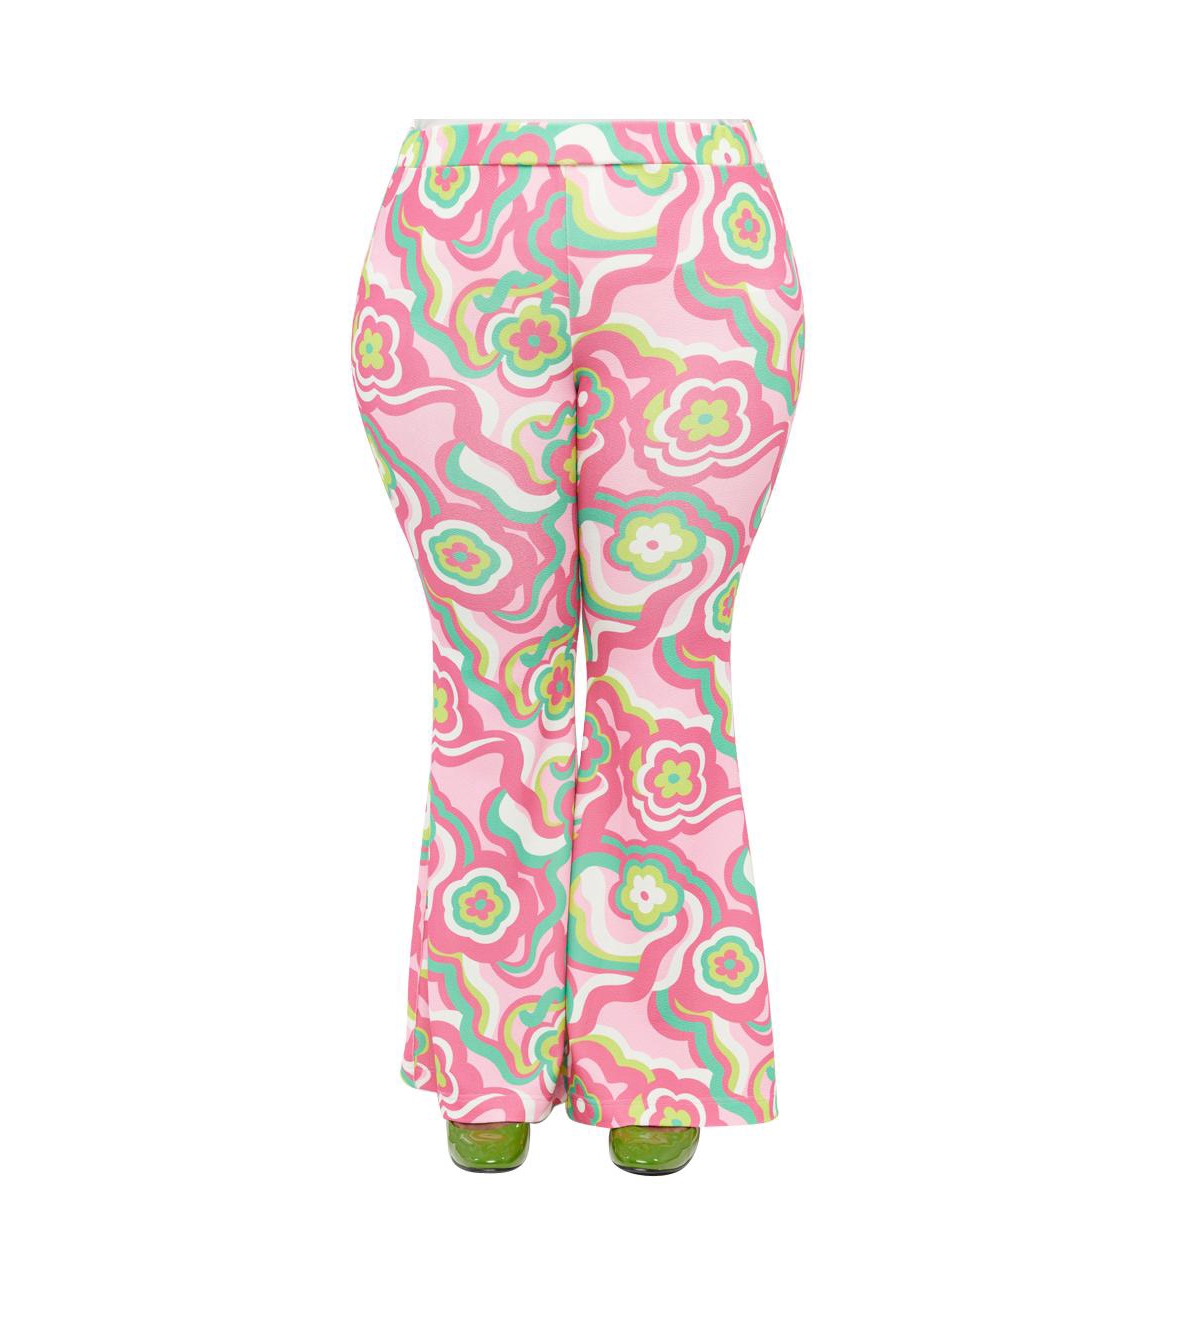 Plus Size 1970s Evening In Flare Pants - Pink  green floral